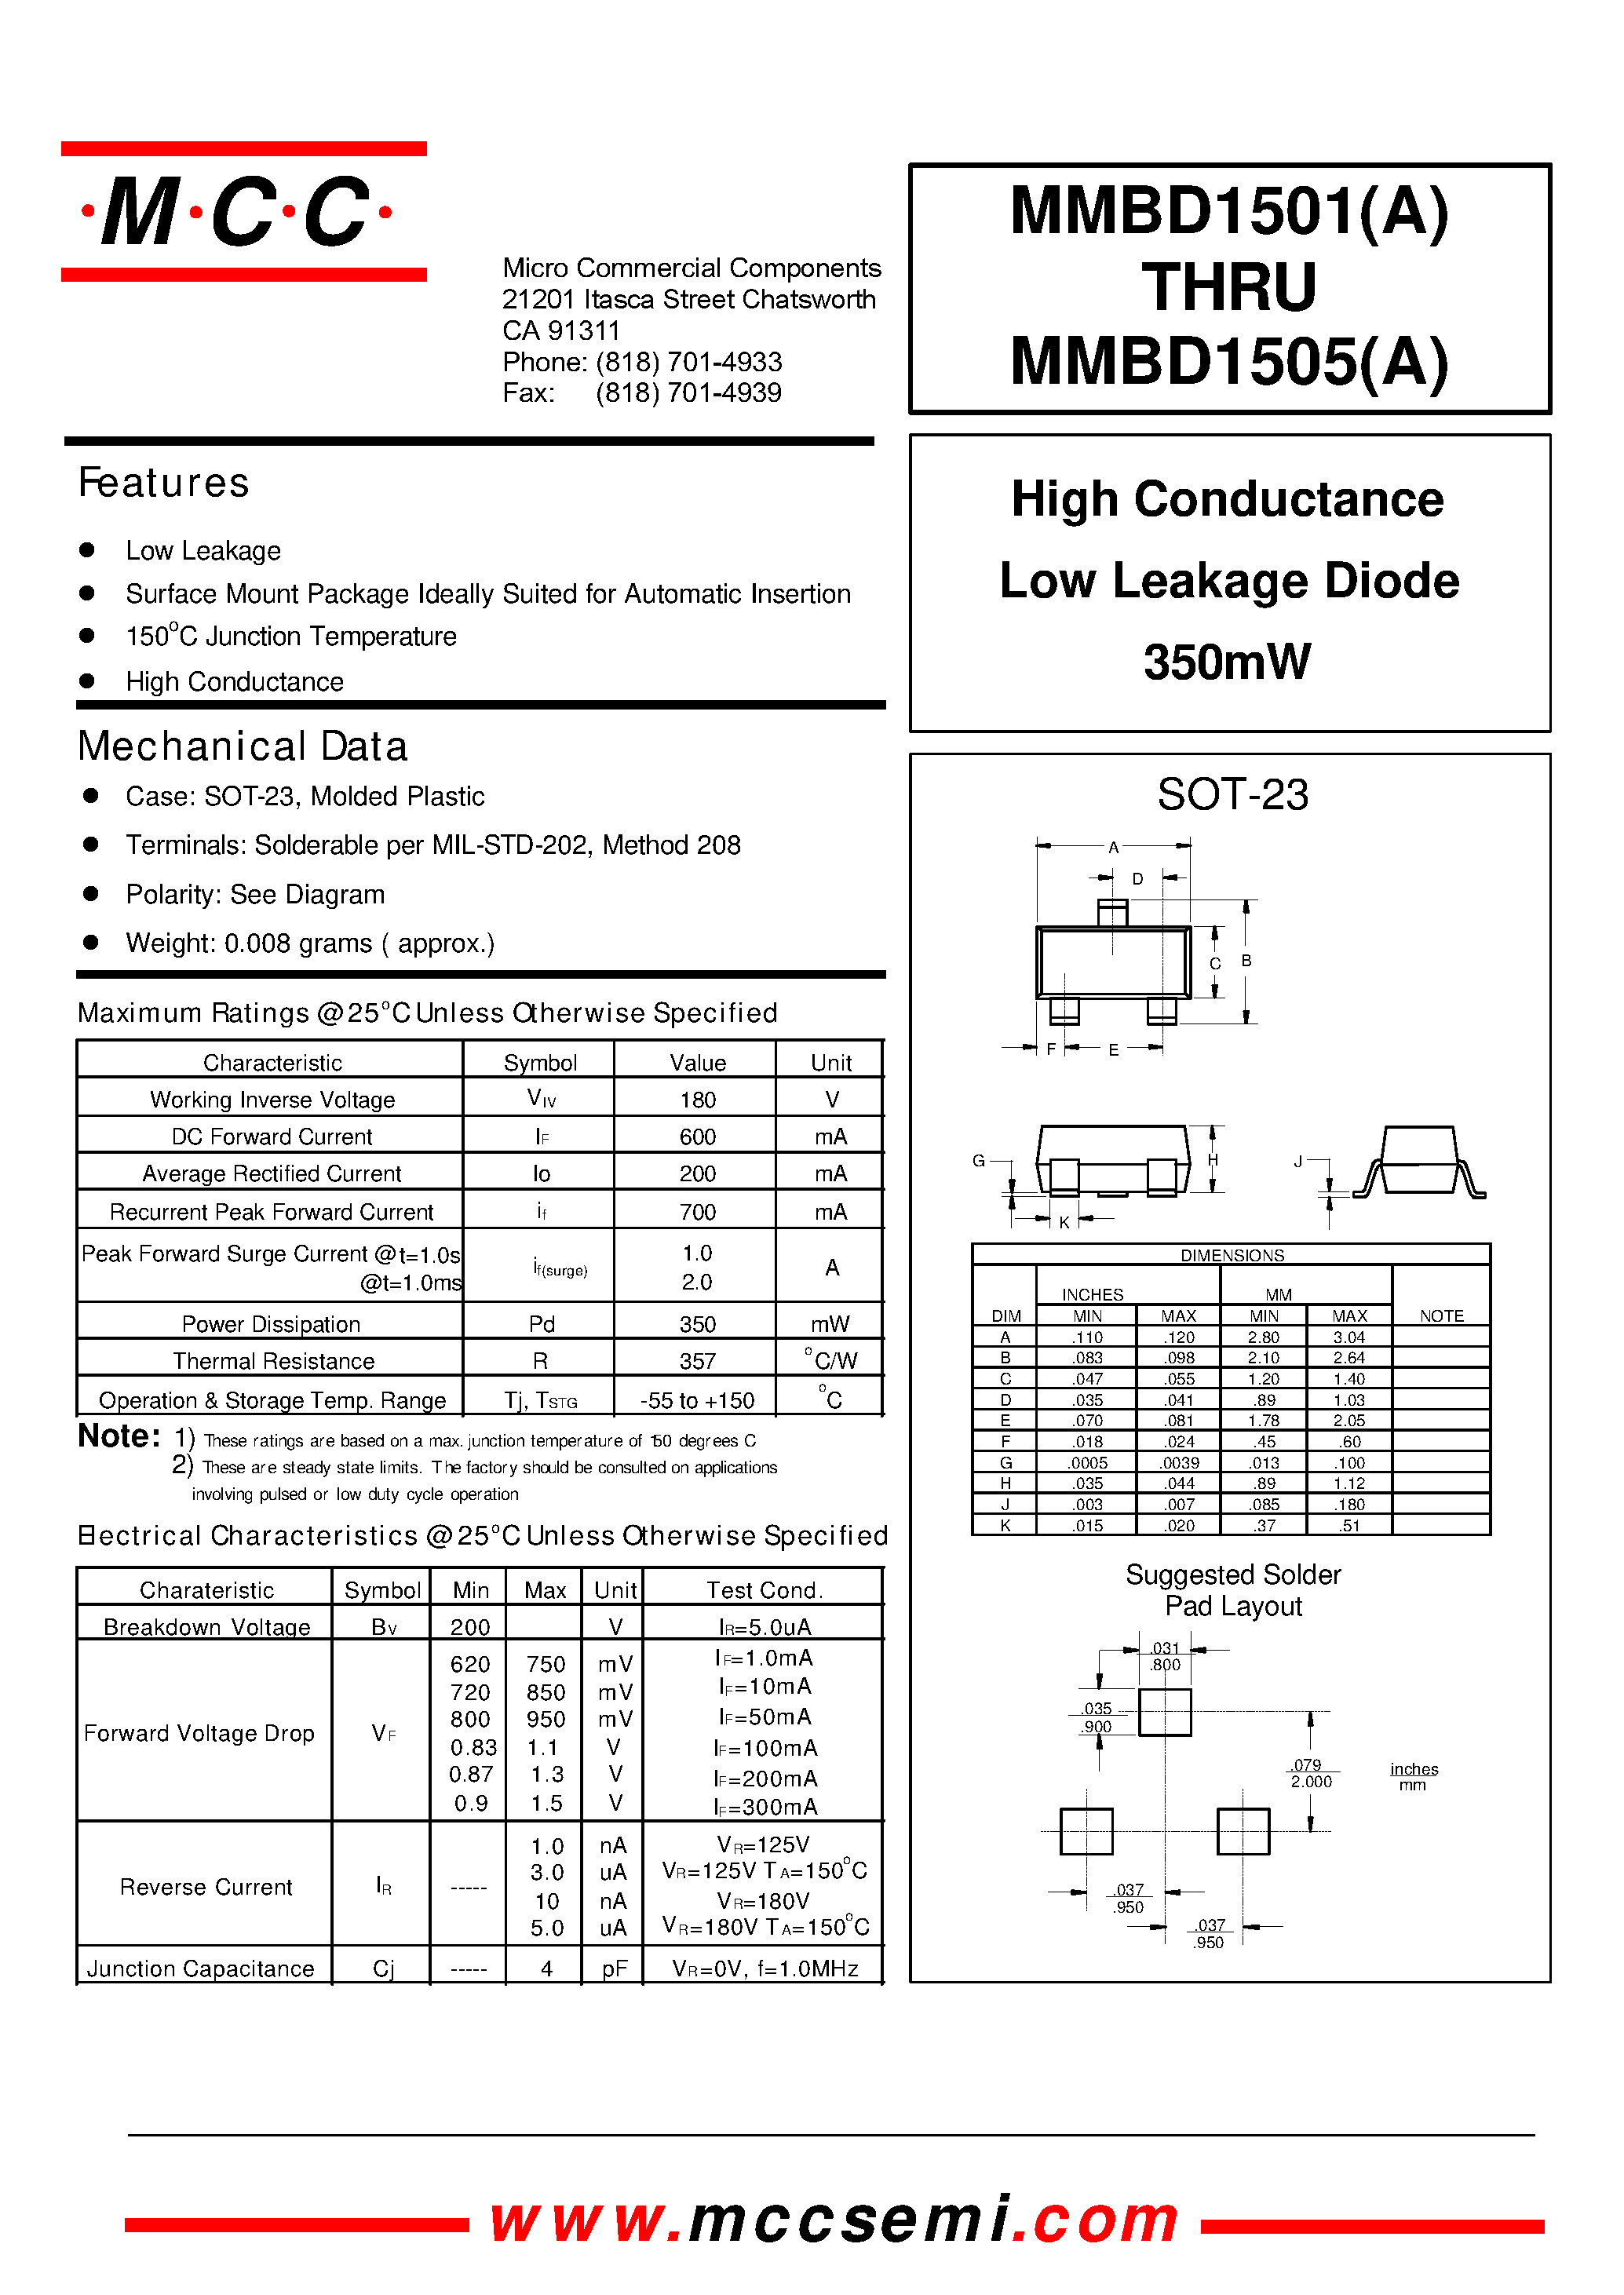 Datasheet MMBD1501 - High Conductance Low Leakage Diode 350mW page 1